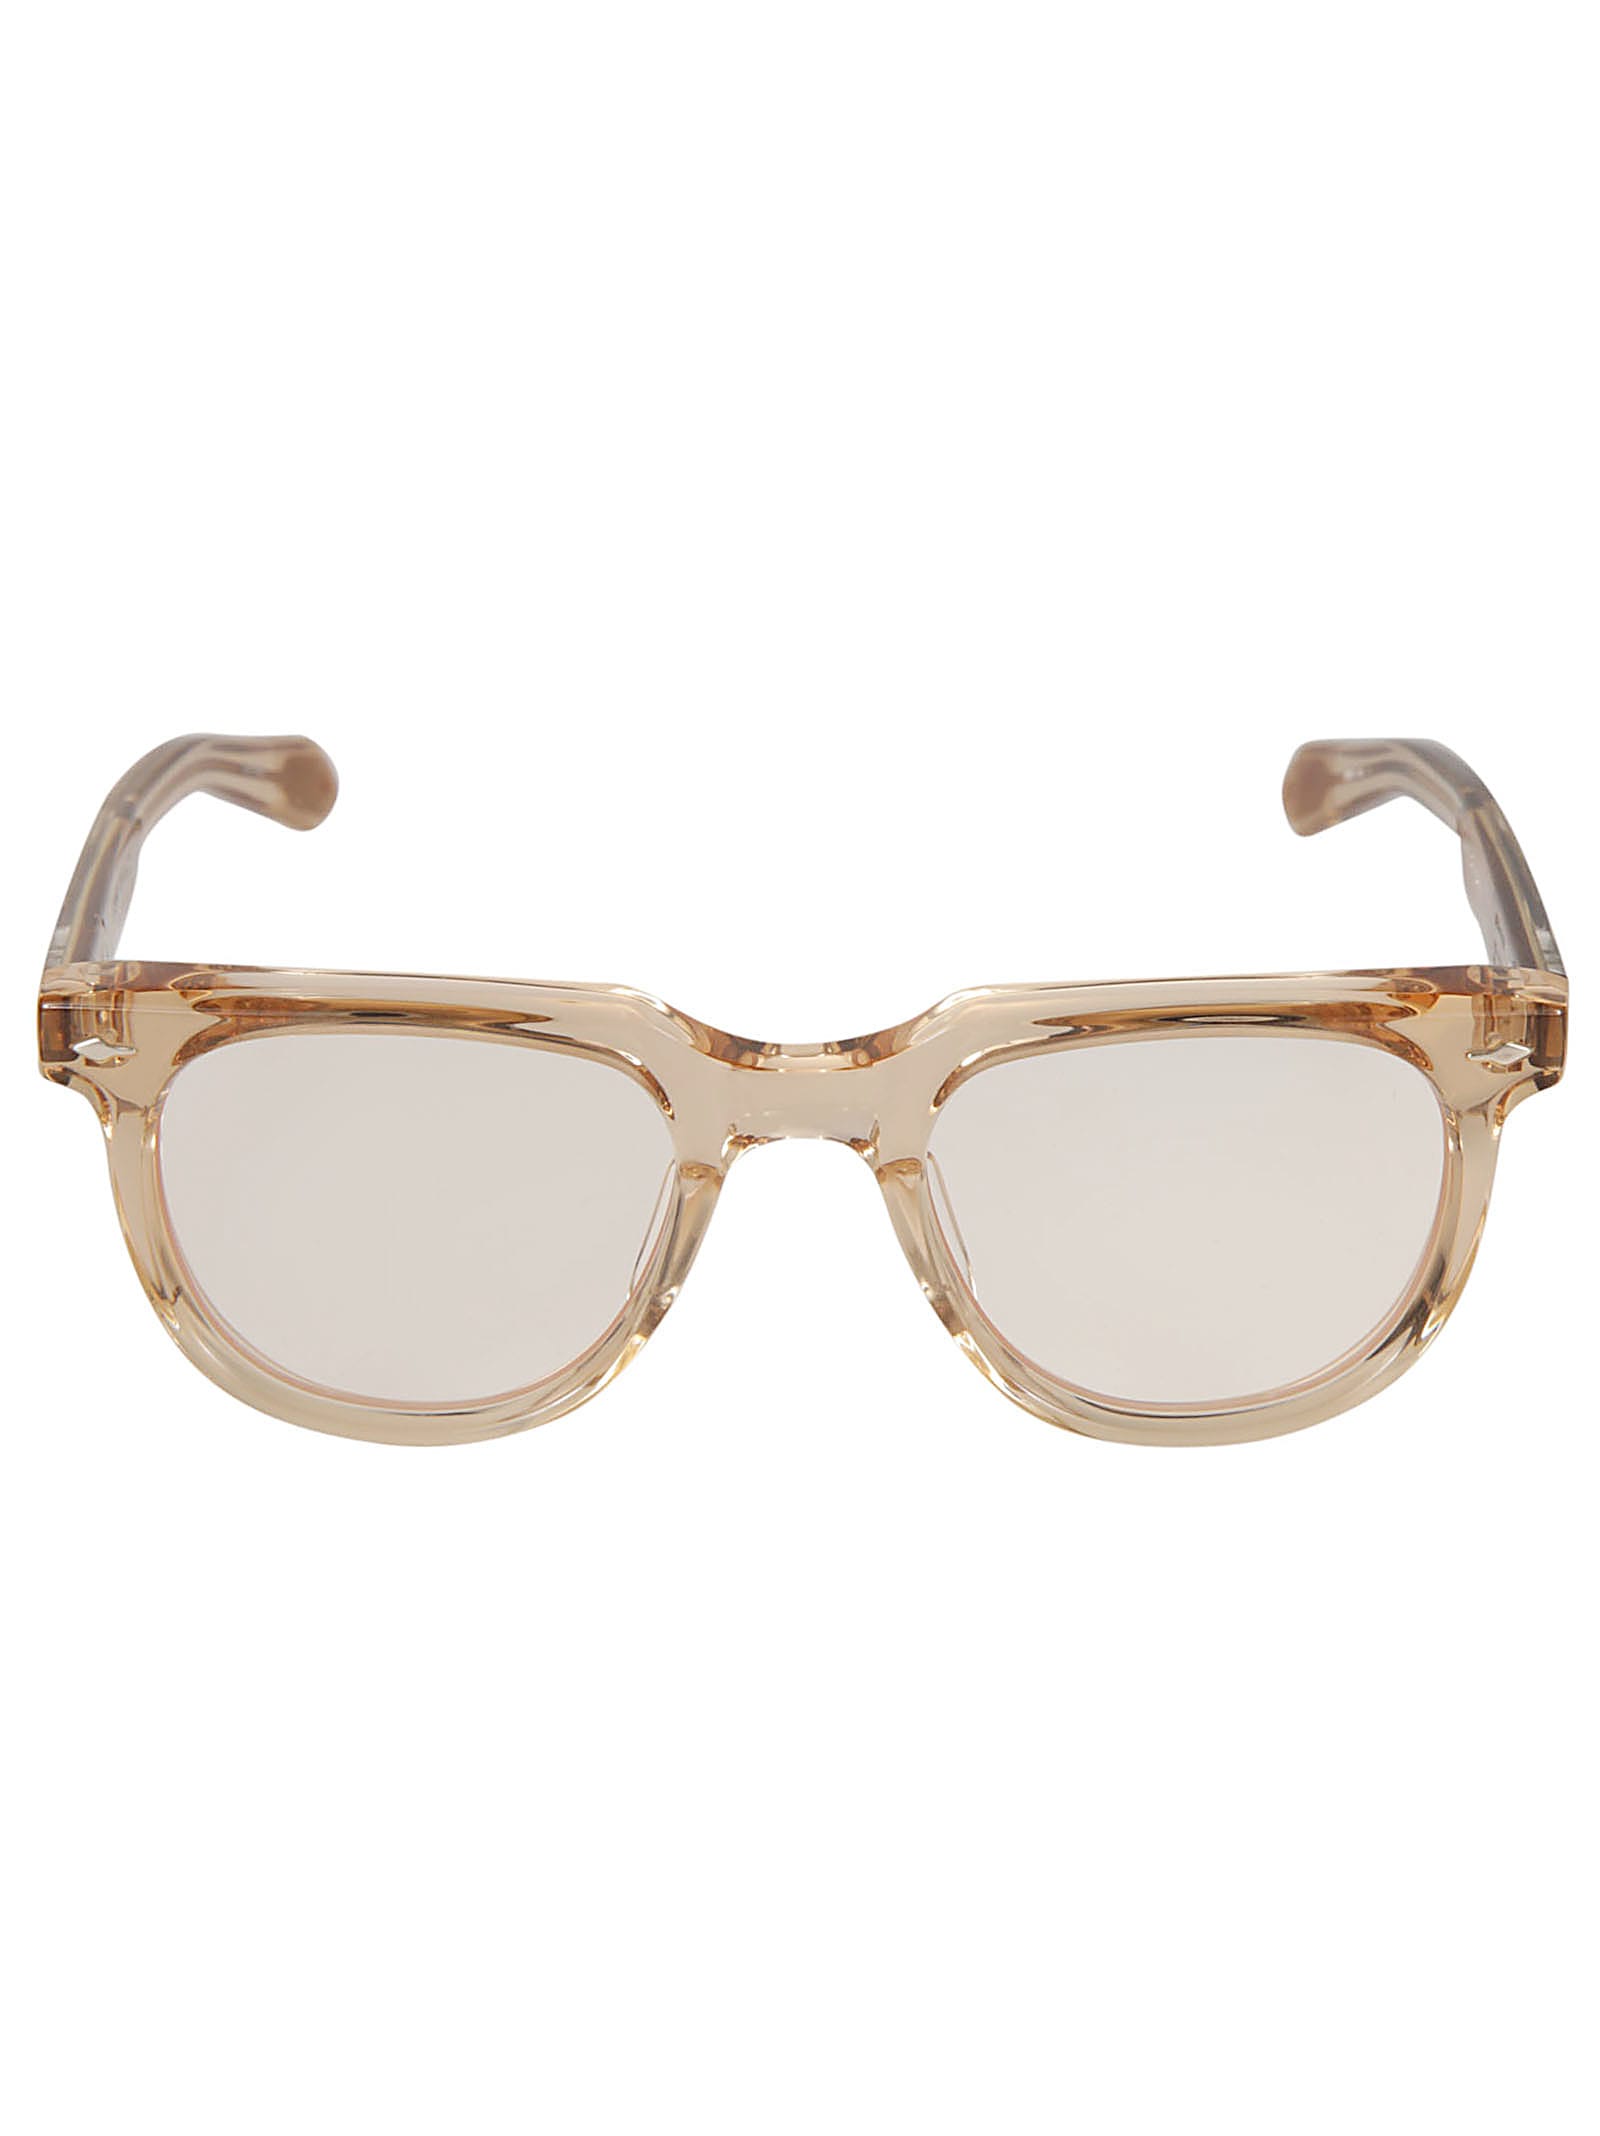 Jacques Marie Mage Stanler Frame In Sand